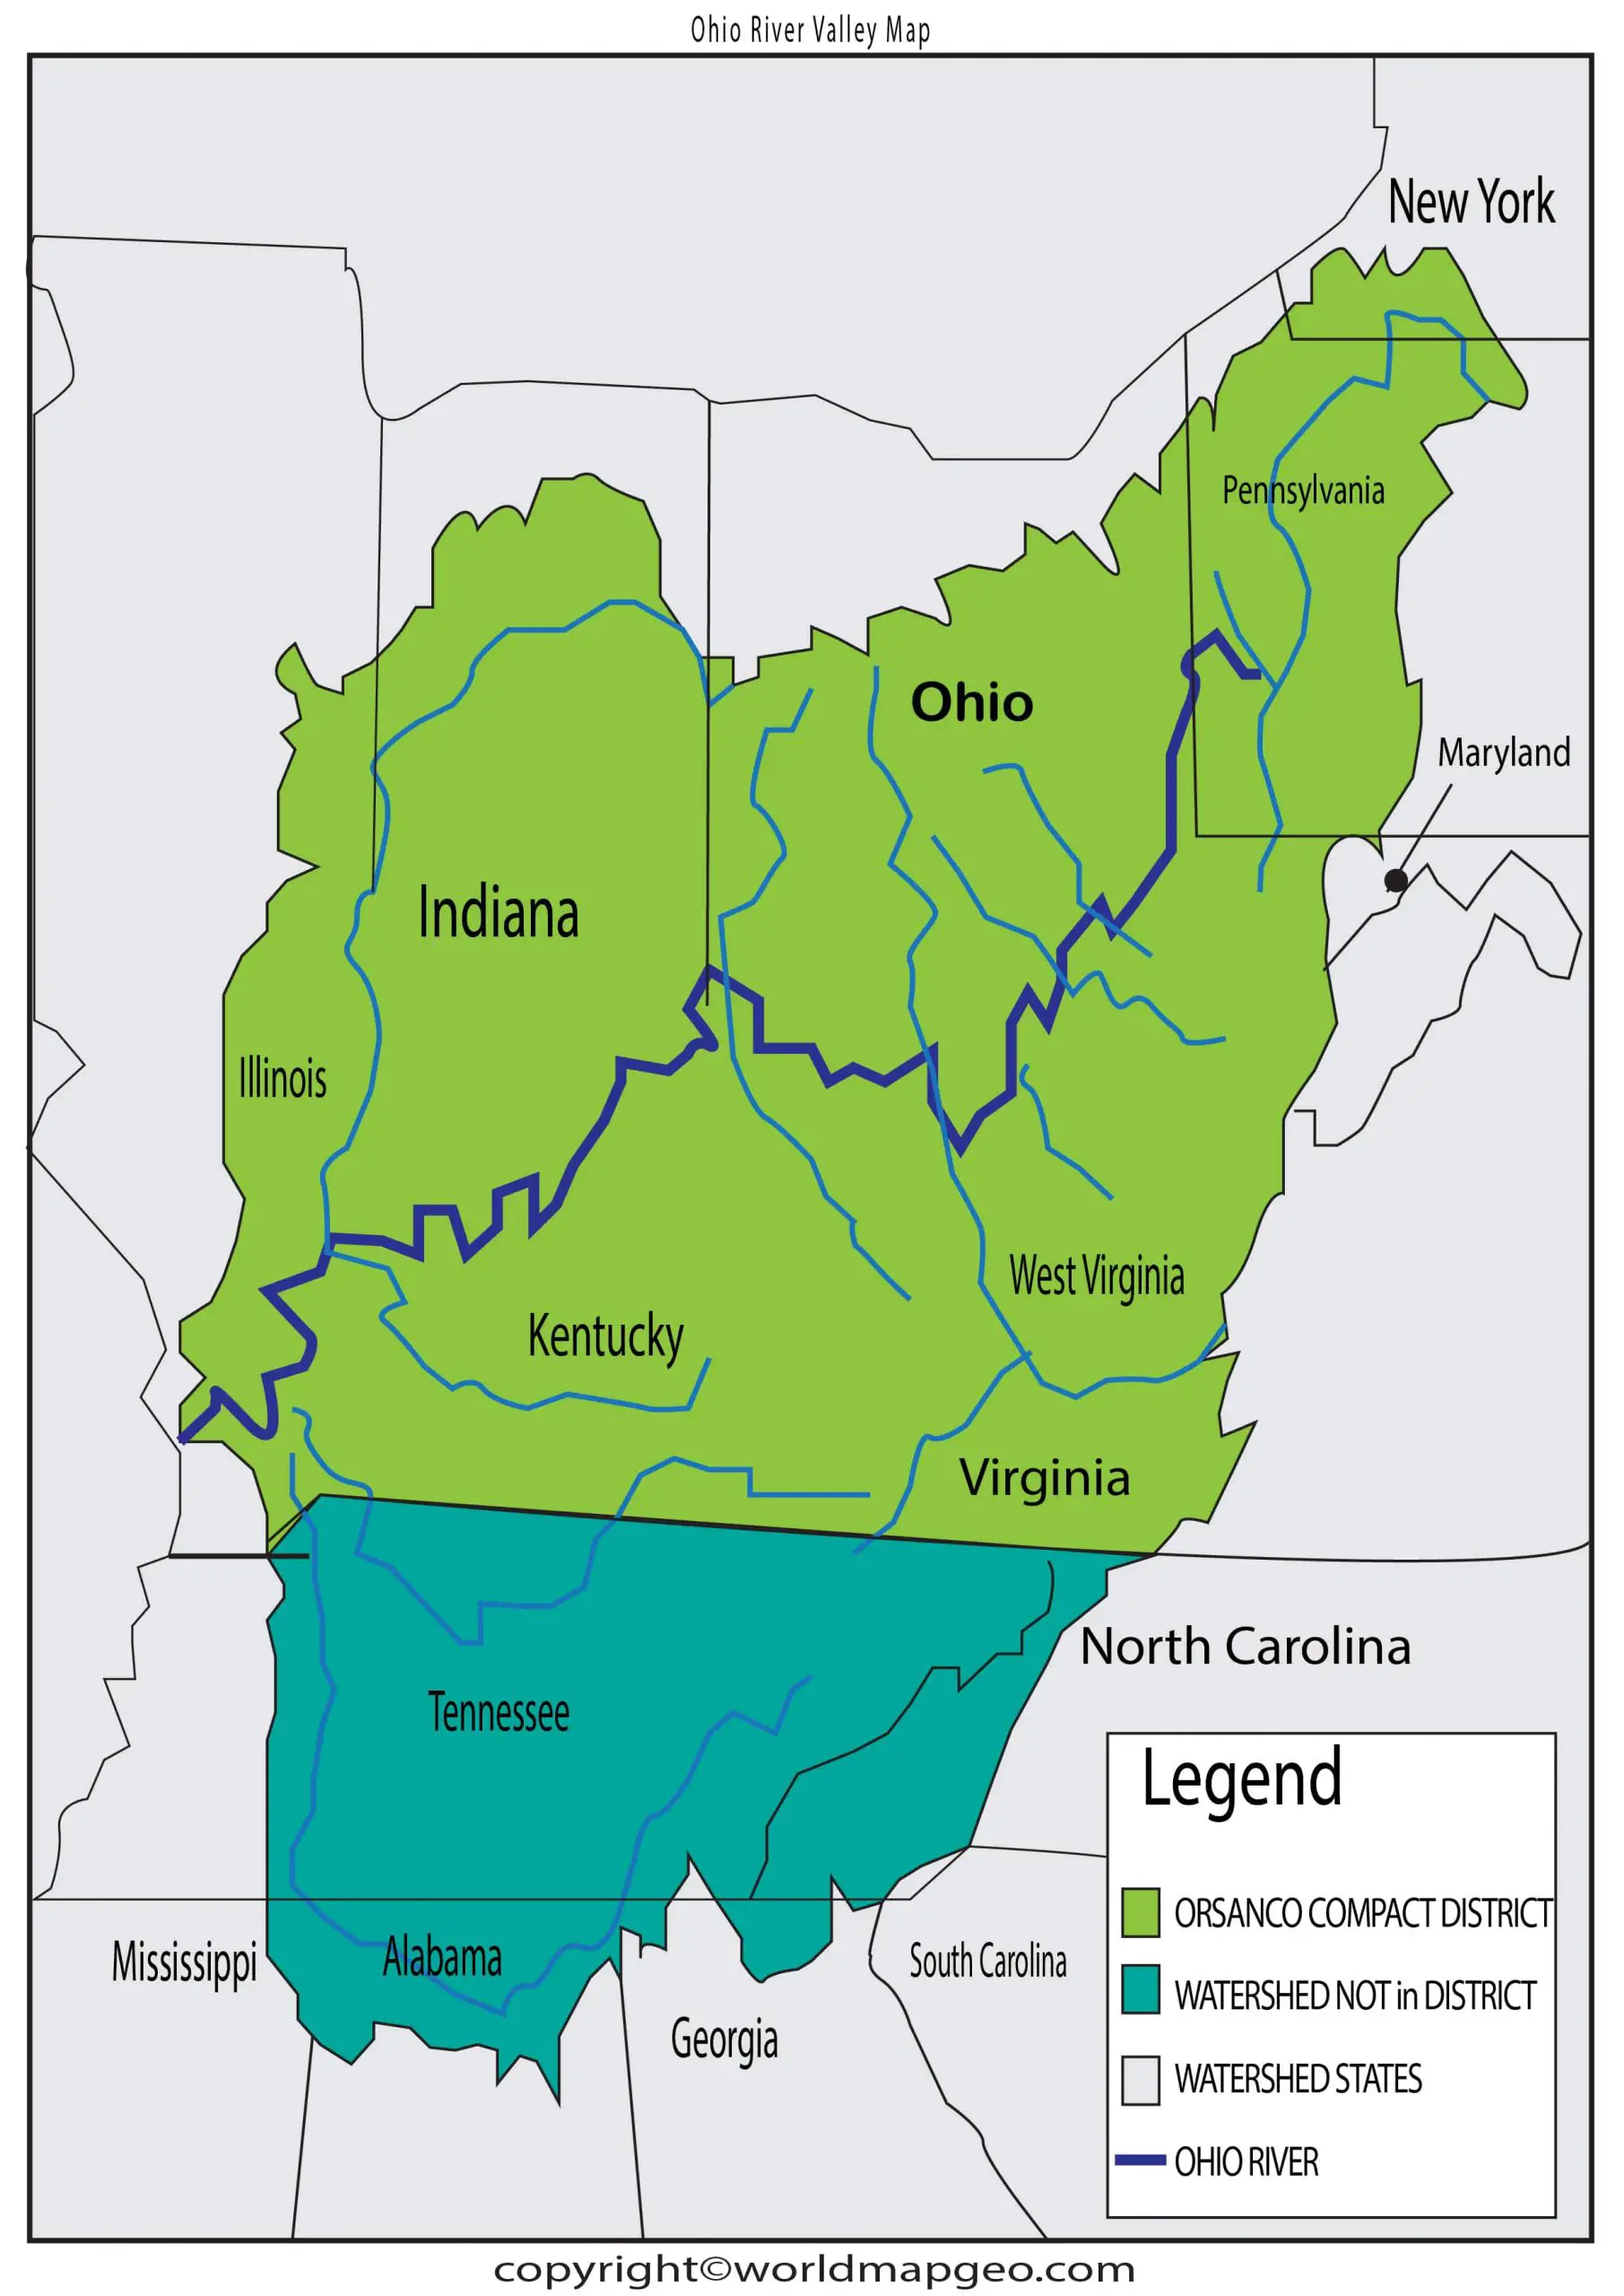 Ohio River Valley Map